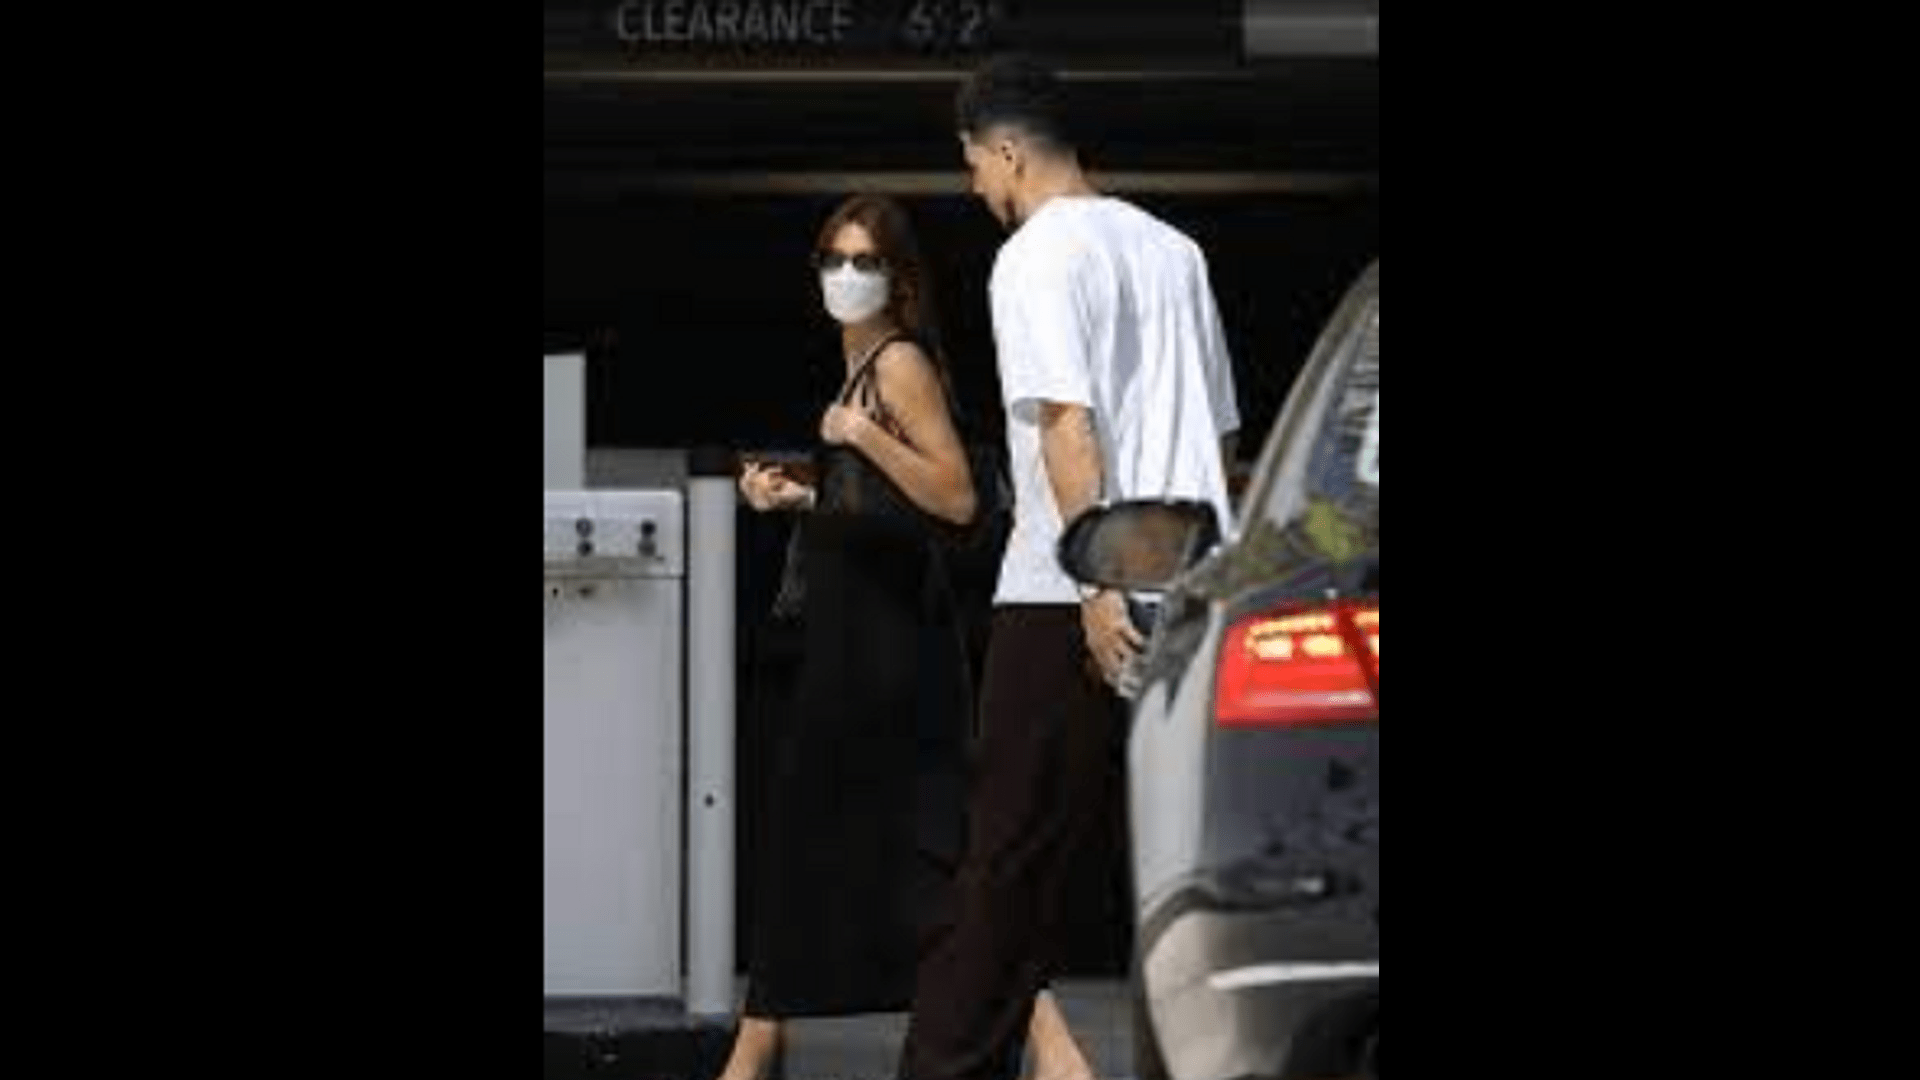 on-april-7-around-los-angeles-kendall-jenner-and-devin-booker-rarely-appear-together